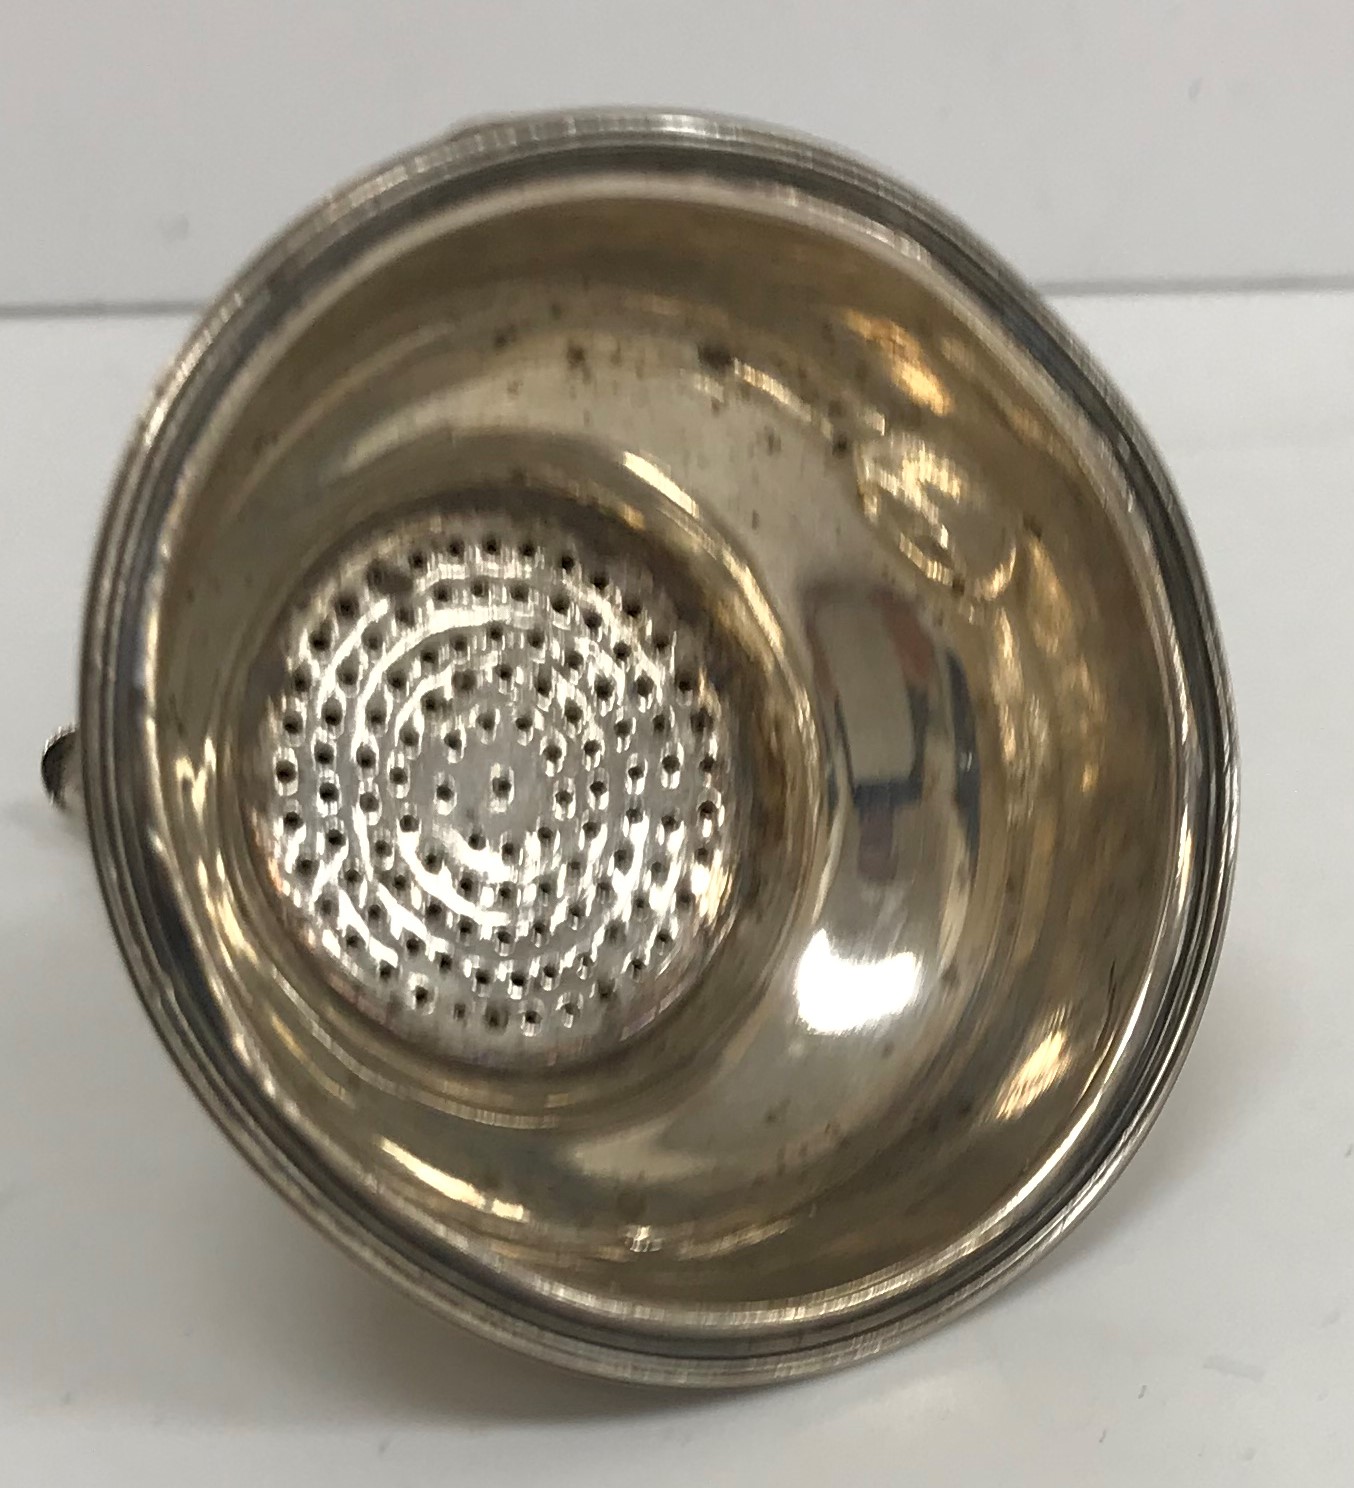 A Regency silver wine funnel of typical form (by Samuel Godbehere, Edward Wigan and James Boult, - Image 2 of 2